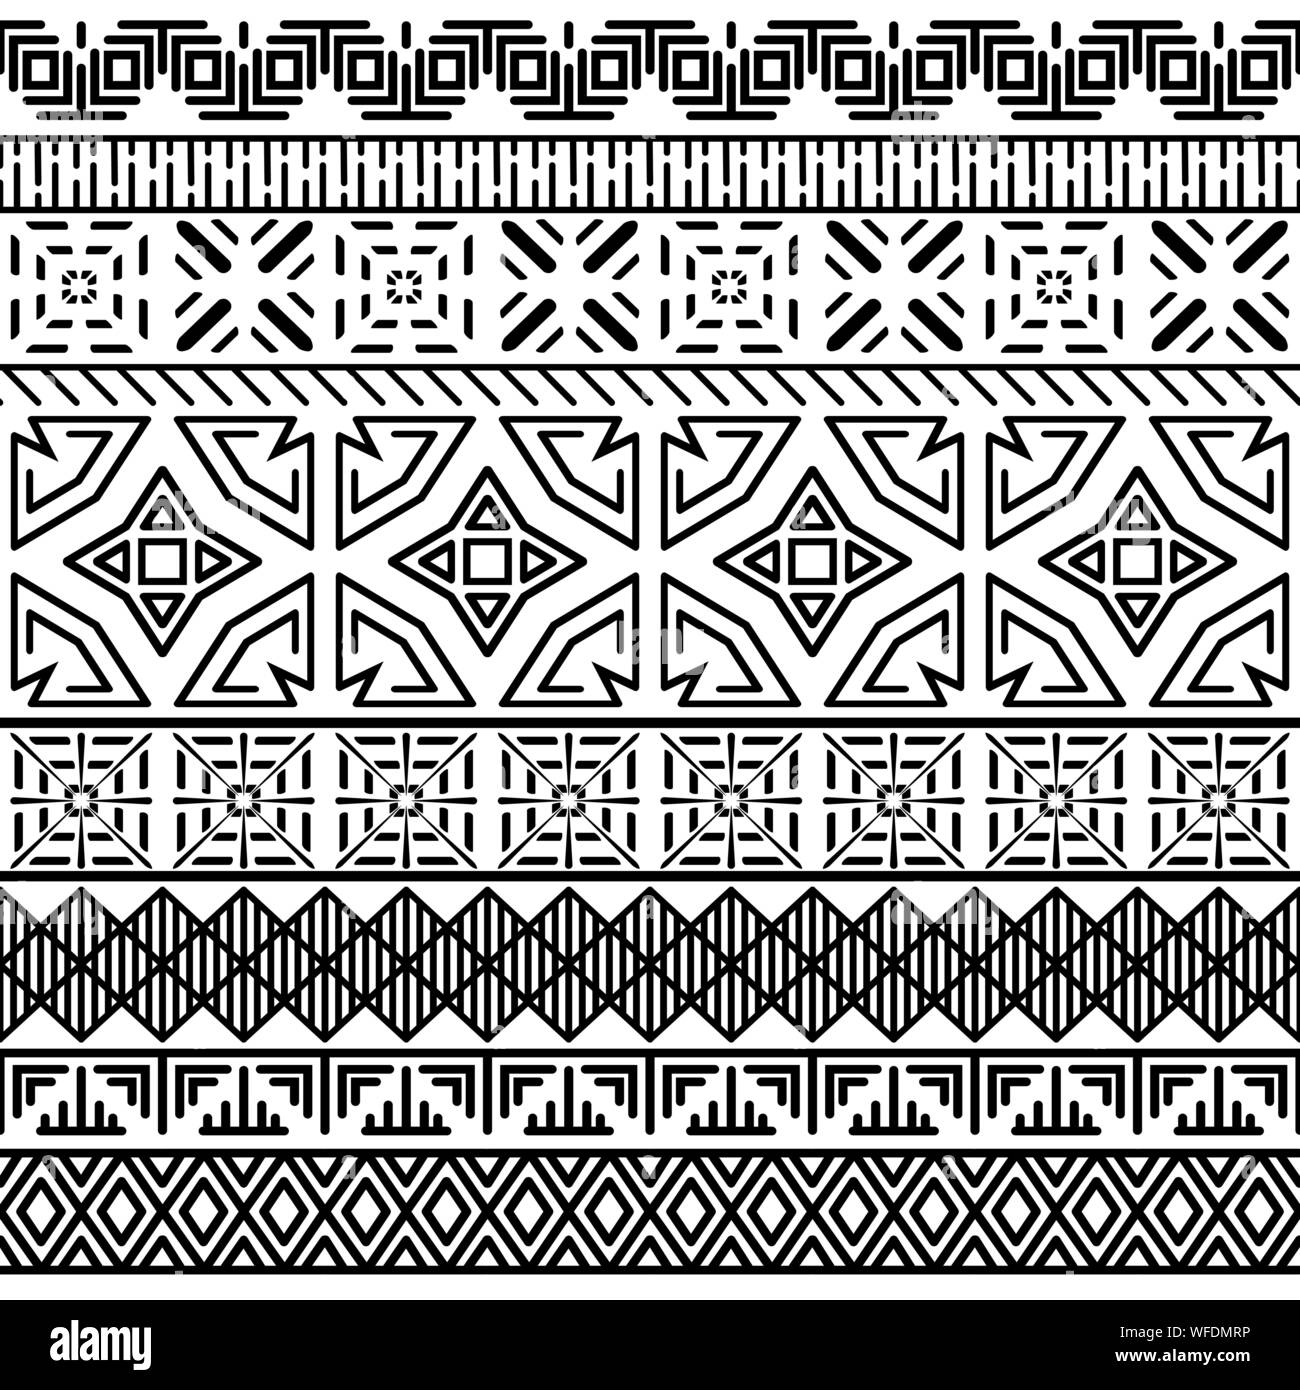 Tribal ethnic seamless pattern. Black and white geometric ornament. Abstract monochrome background. Textile design. Vector illustration. Stock Vector